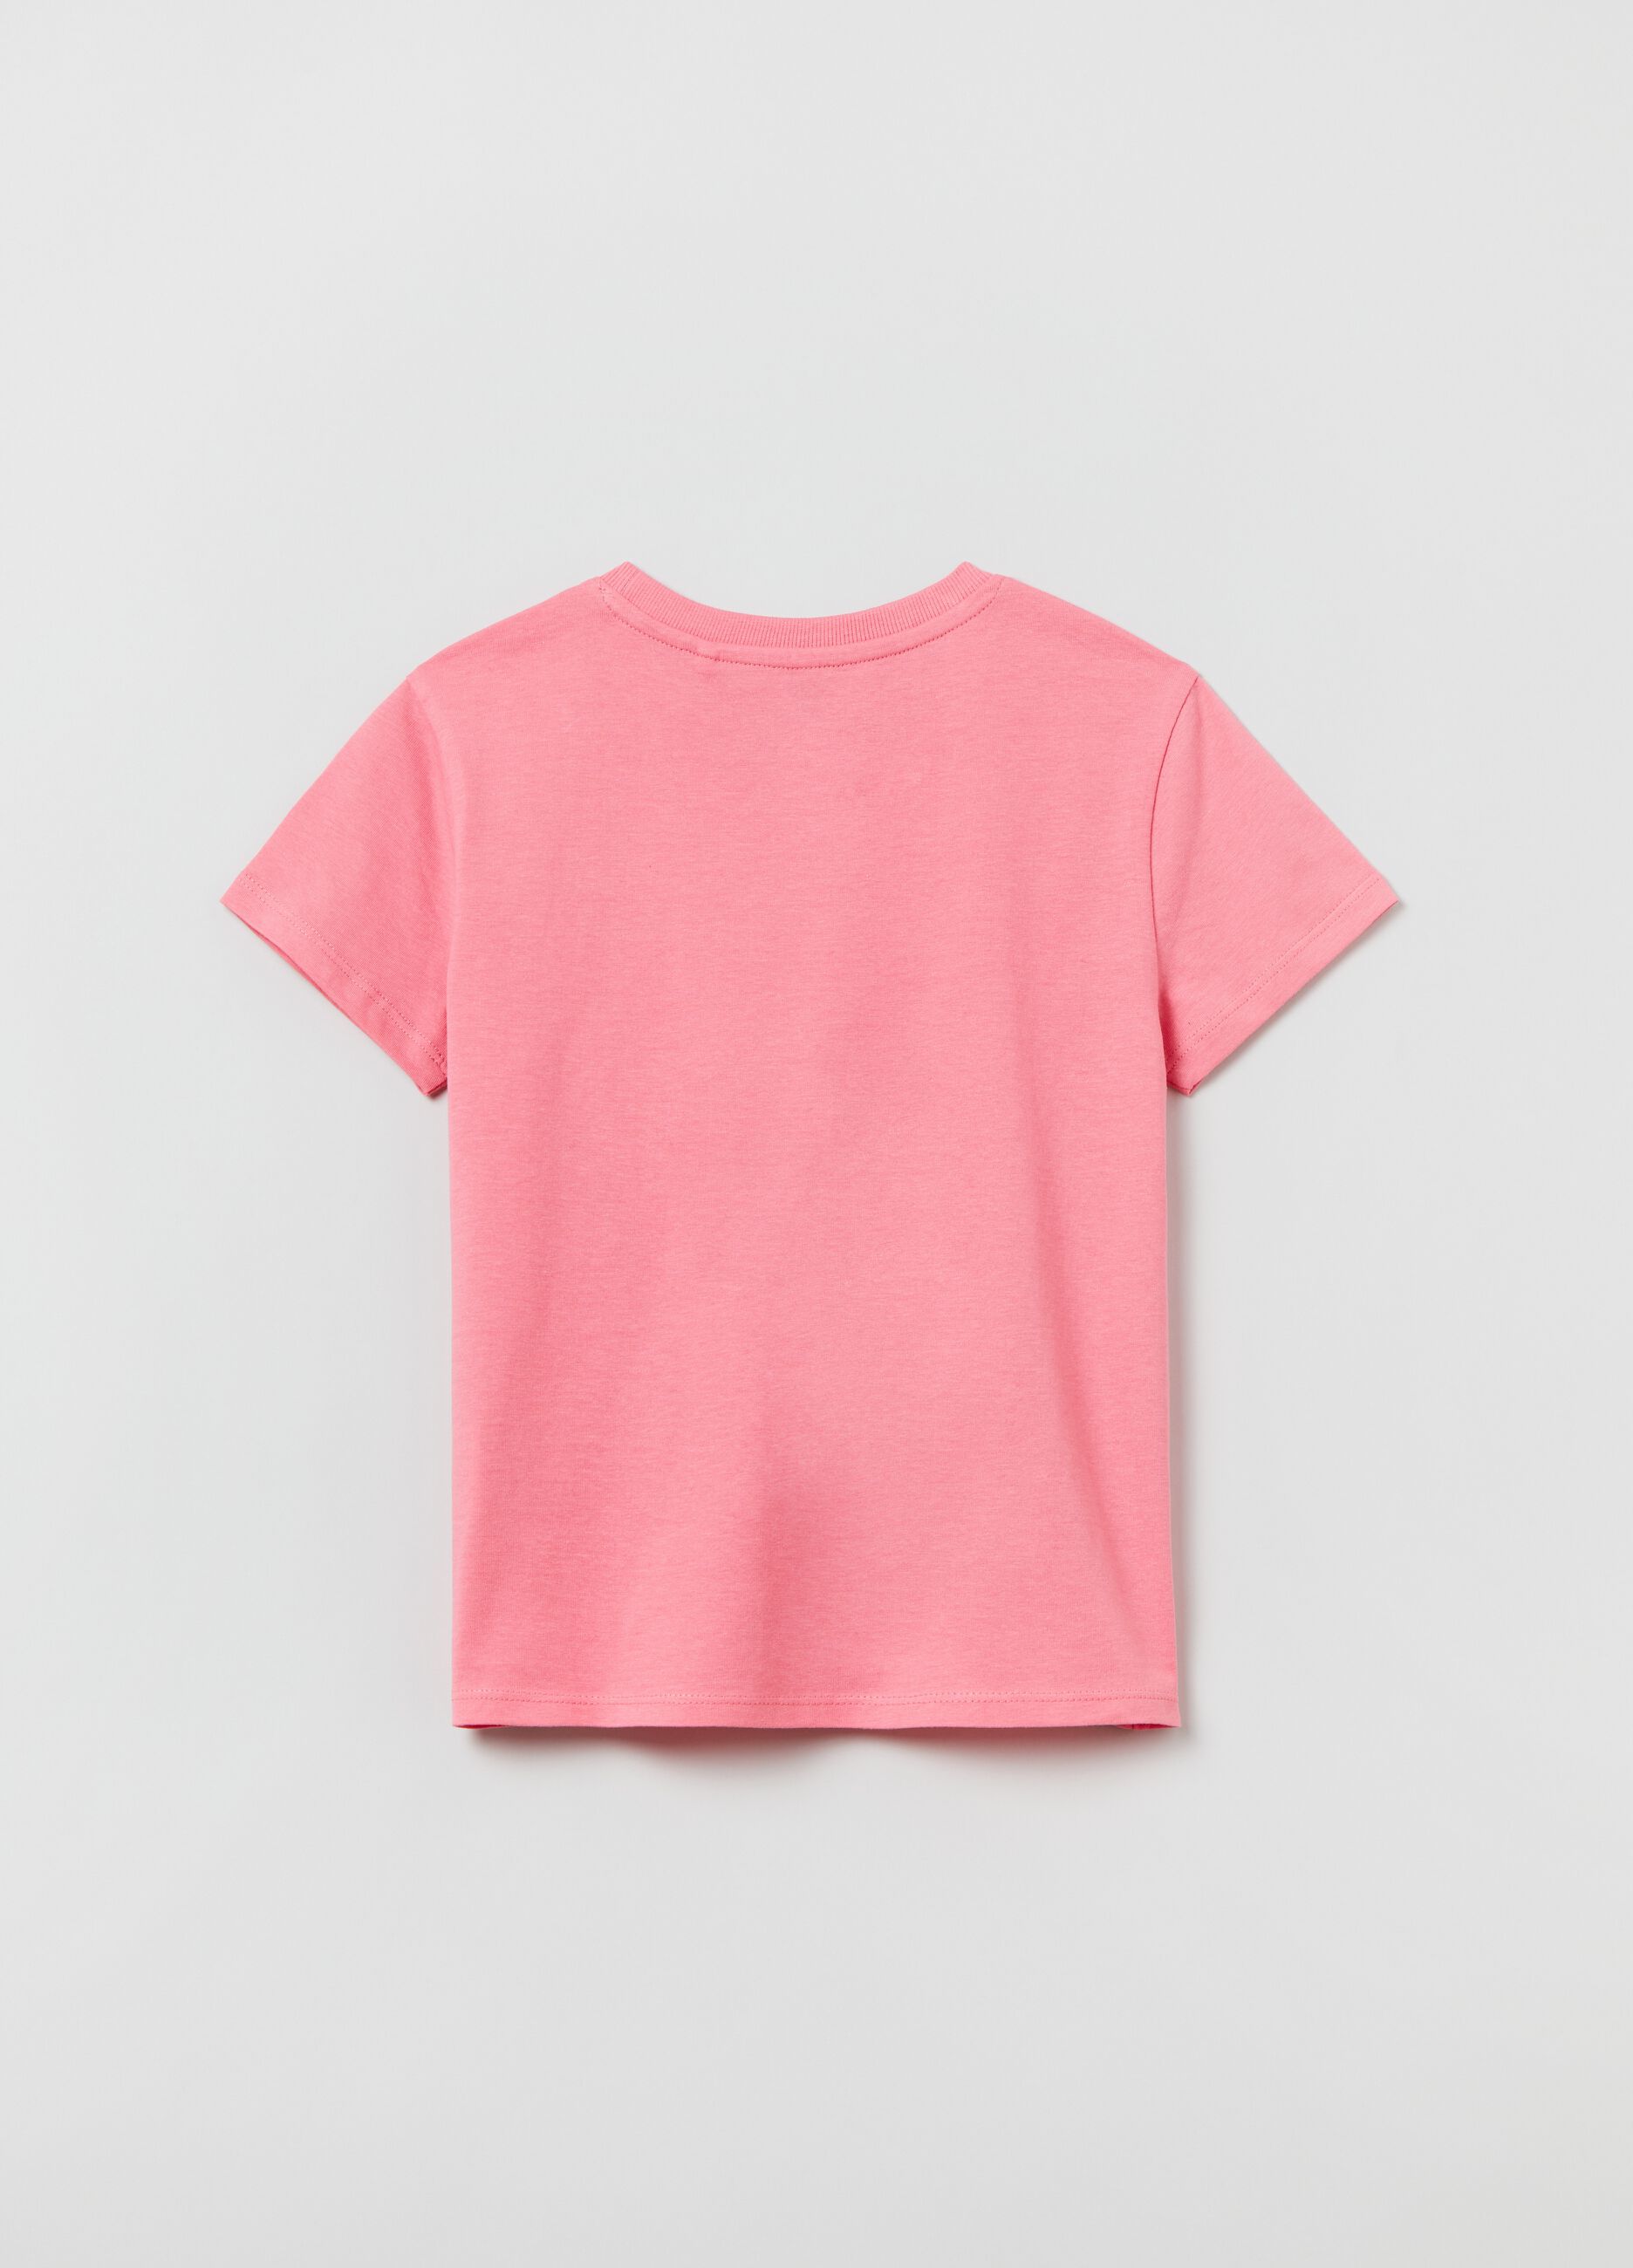 T-shirt with round neck and spiral print